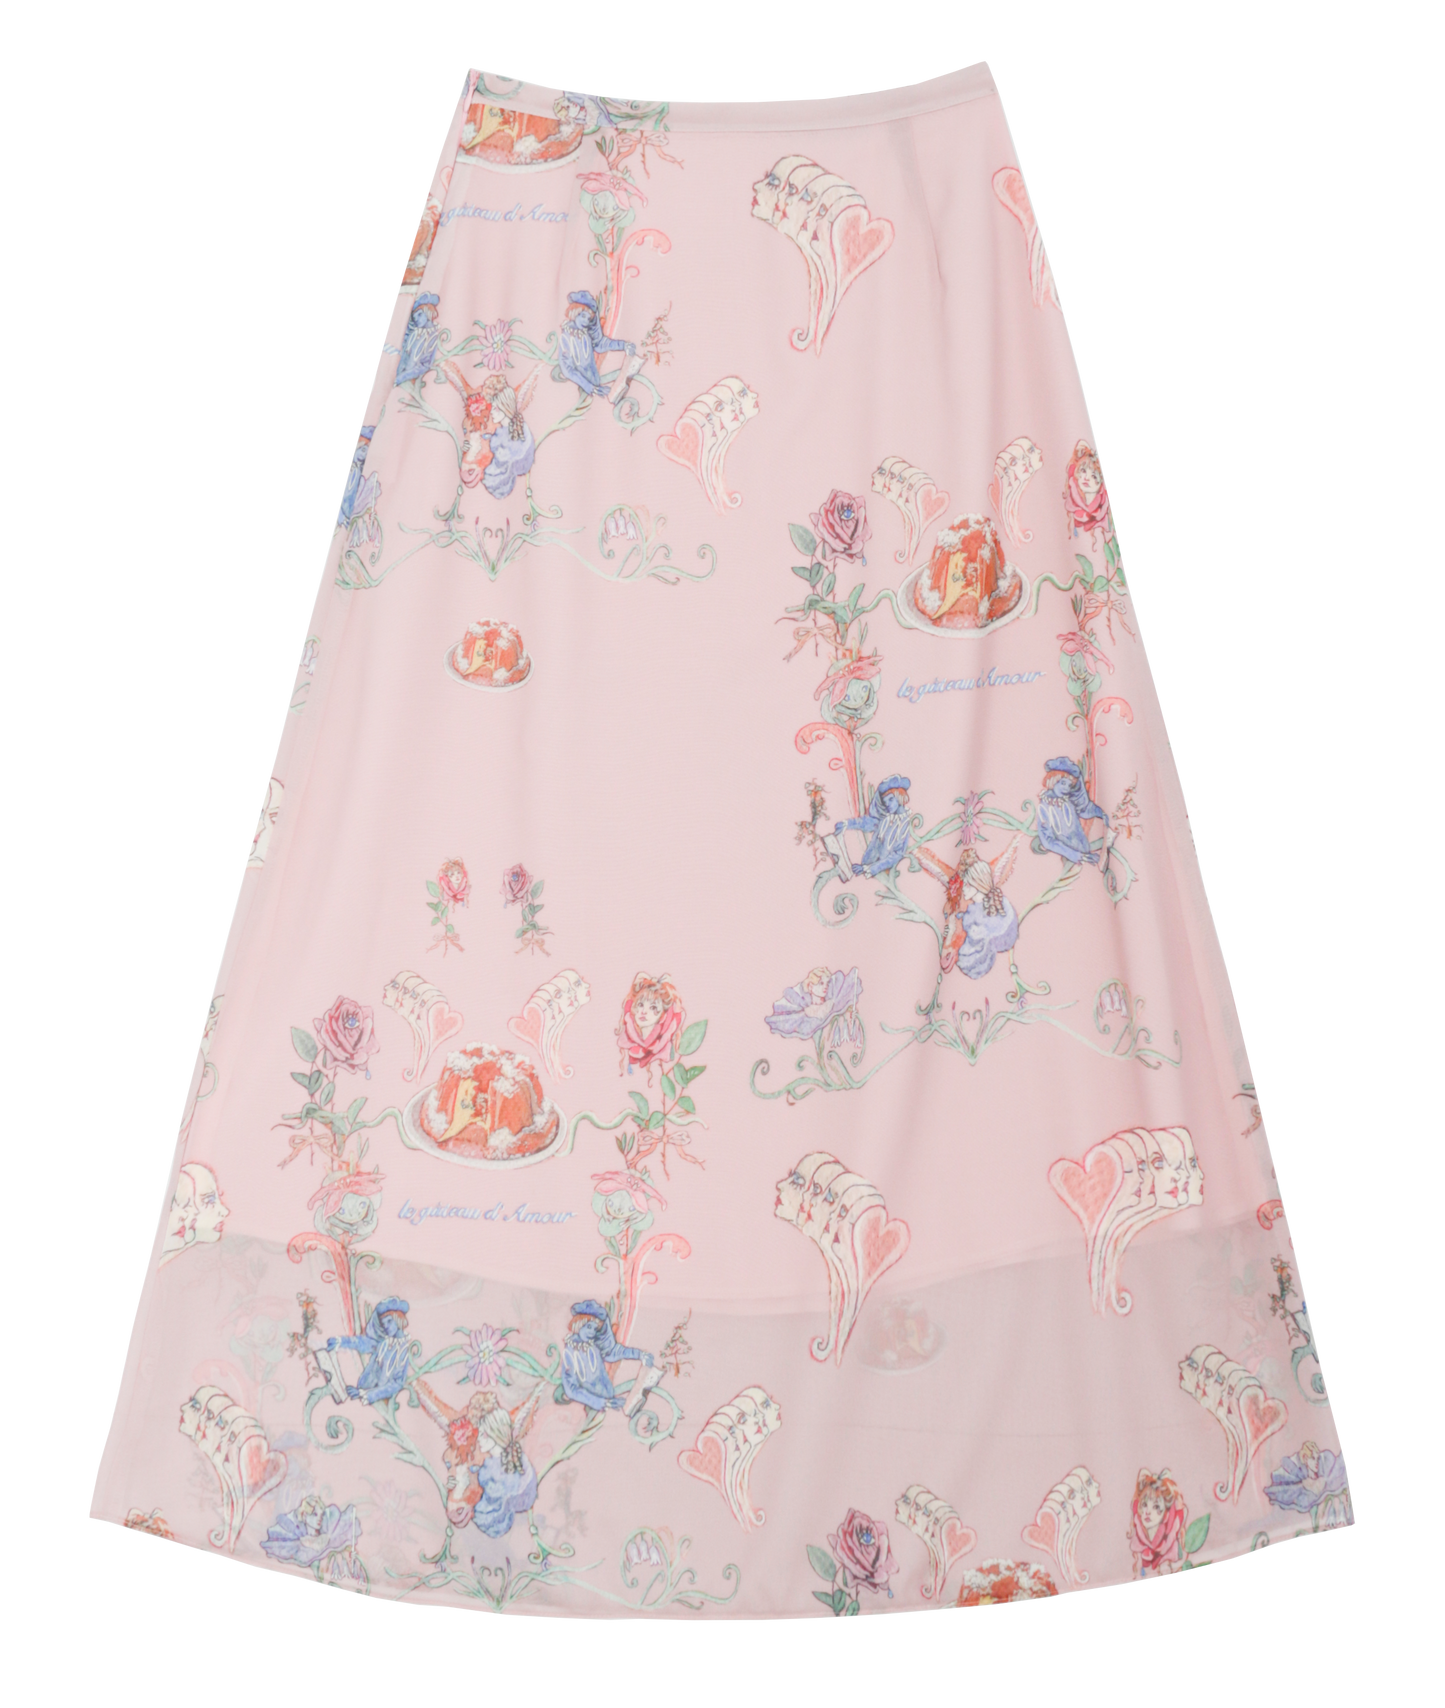 Tuesday Skirt in gateau d'amour